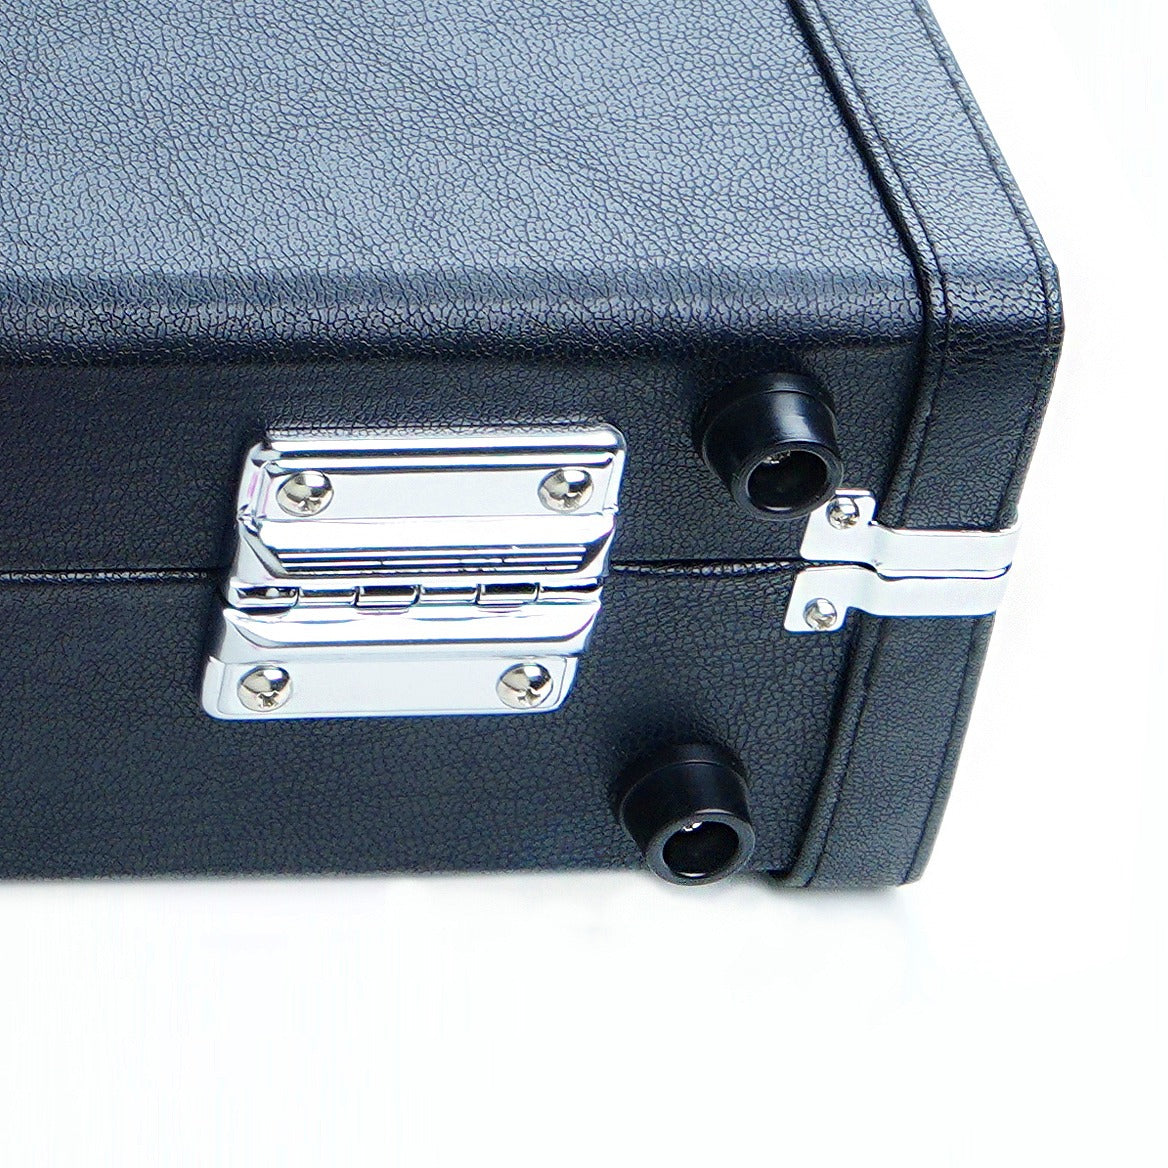 Leather Attache Case for Kitchen Knives (Western style 12 slots)